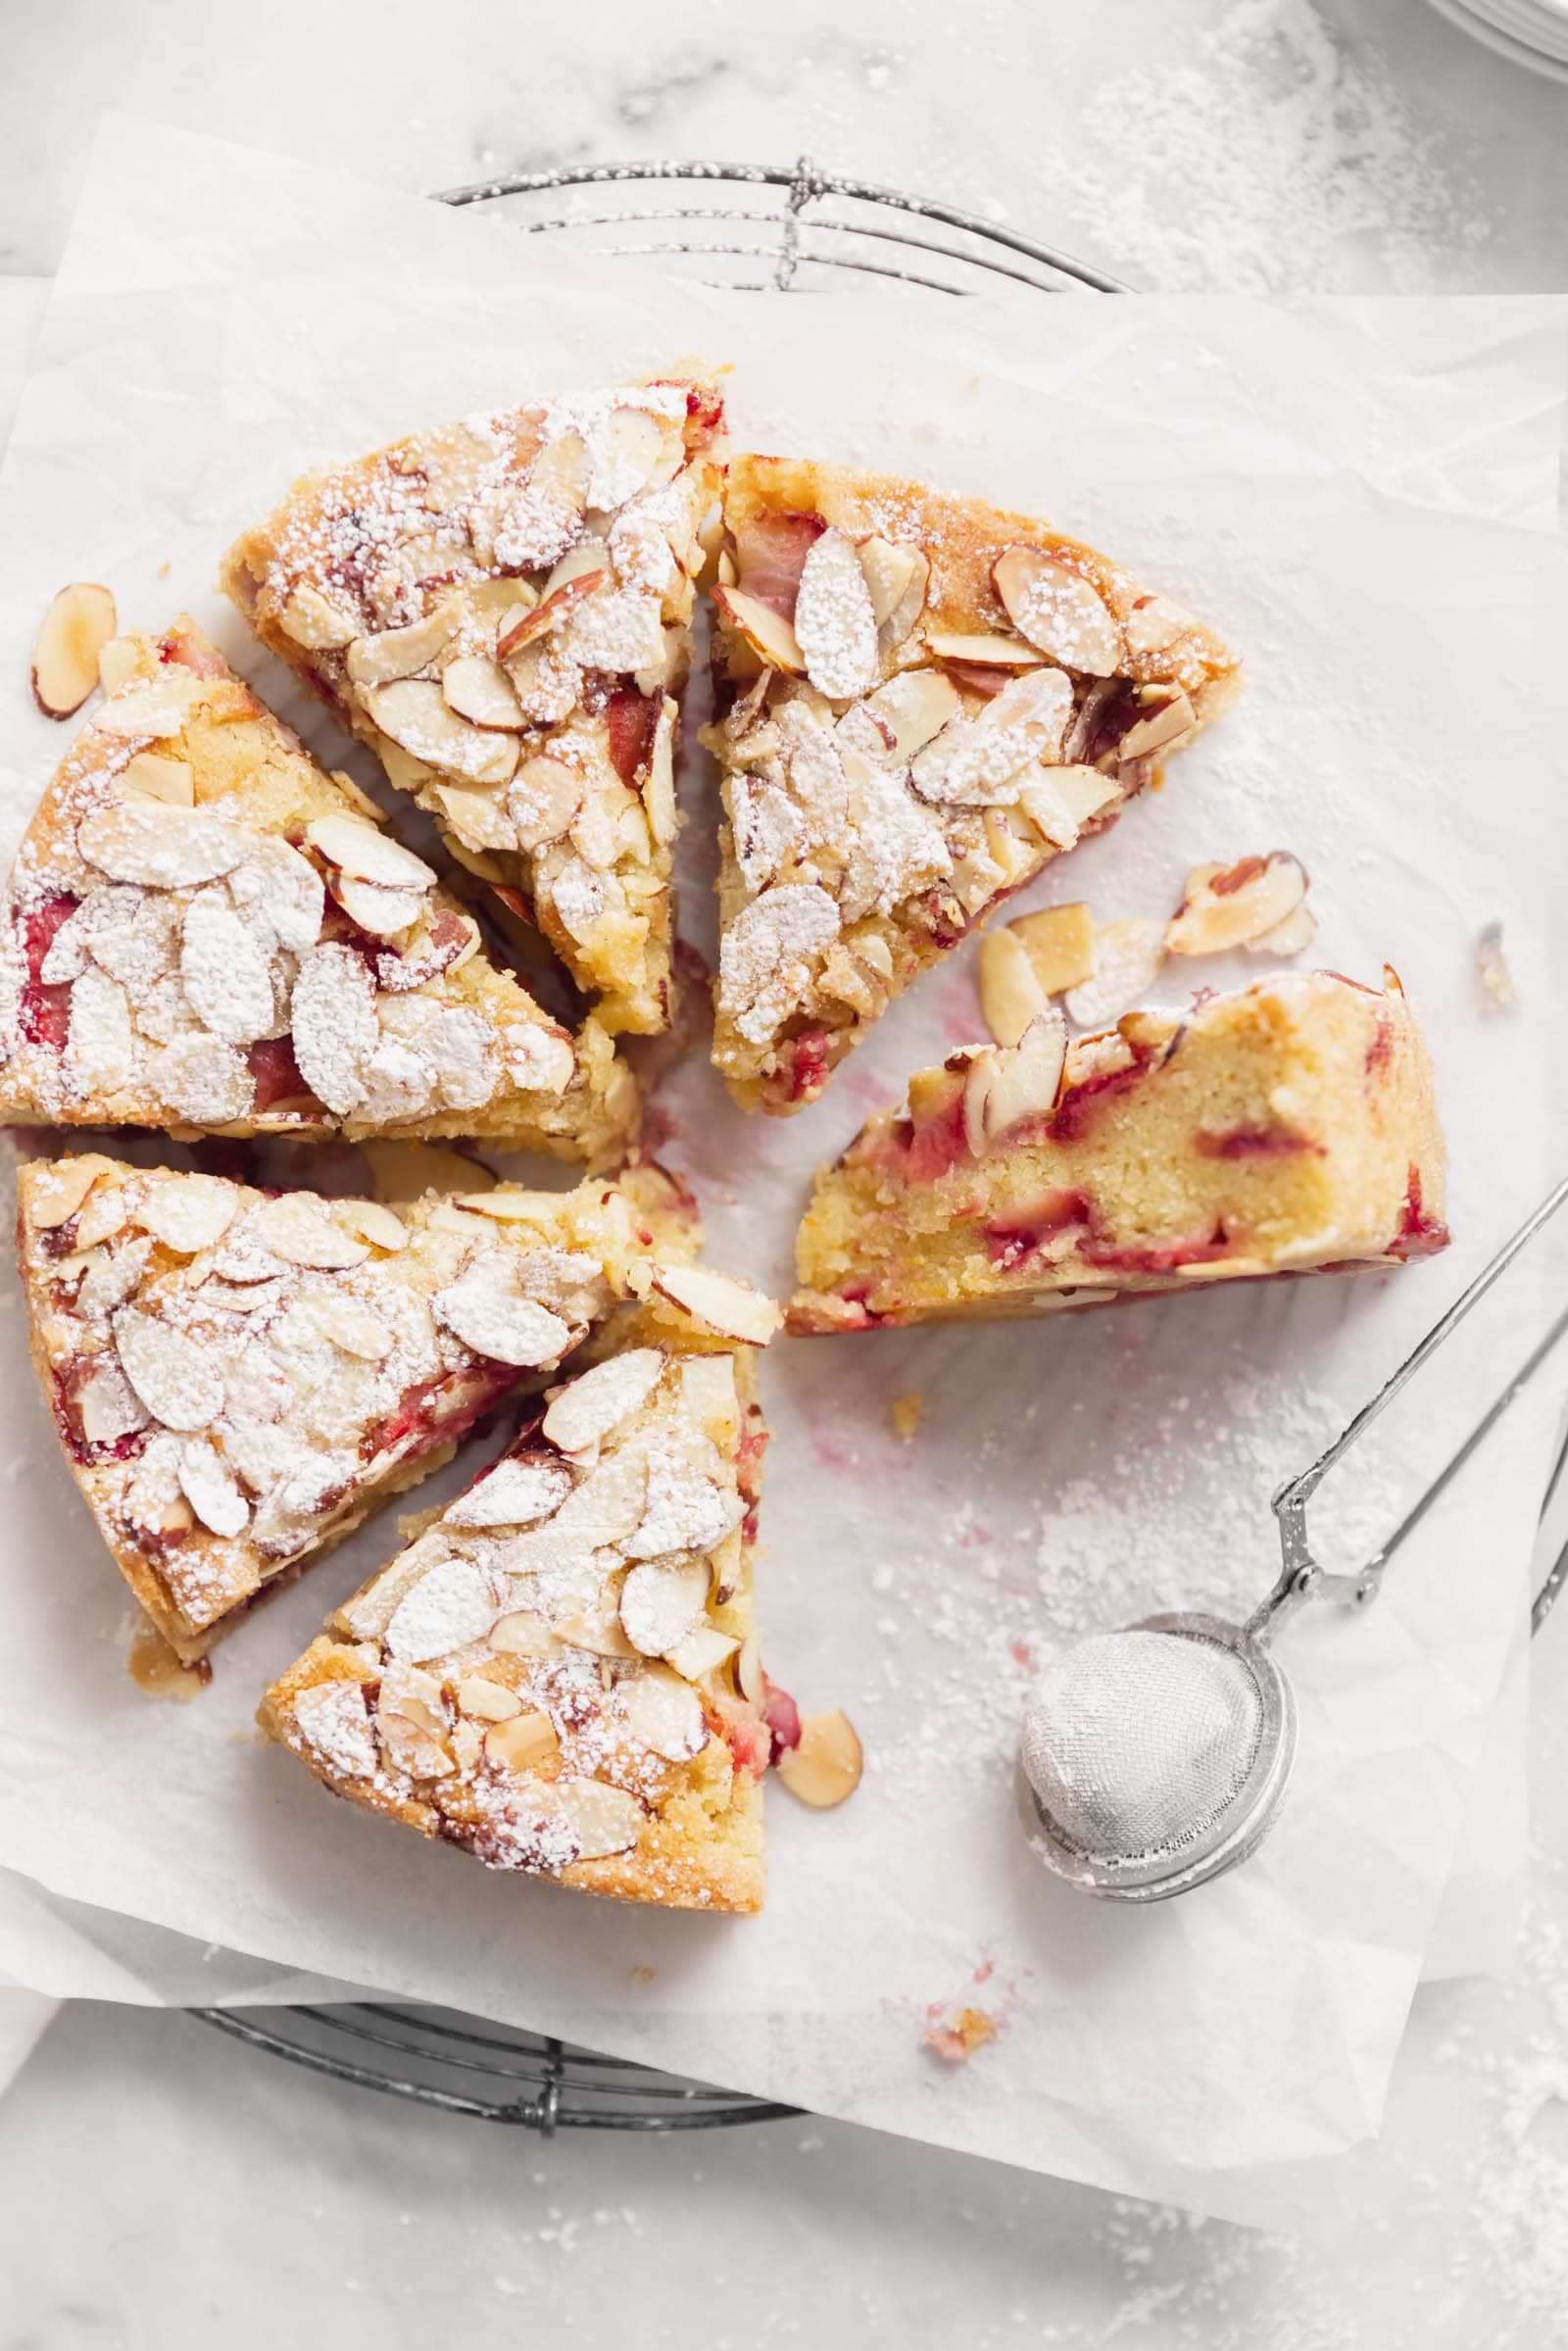 Gluten-Free Almond Cake With Strawberries - What's Gaby Cooking